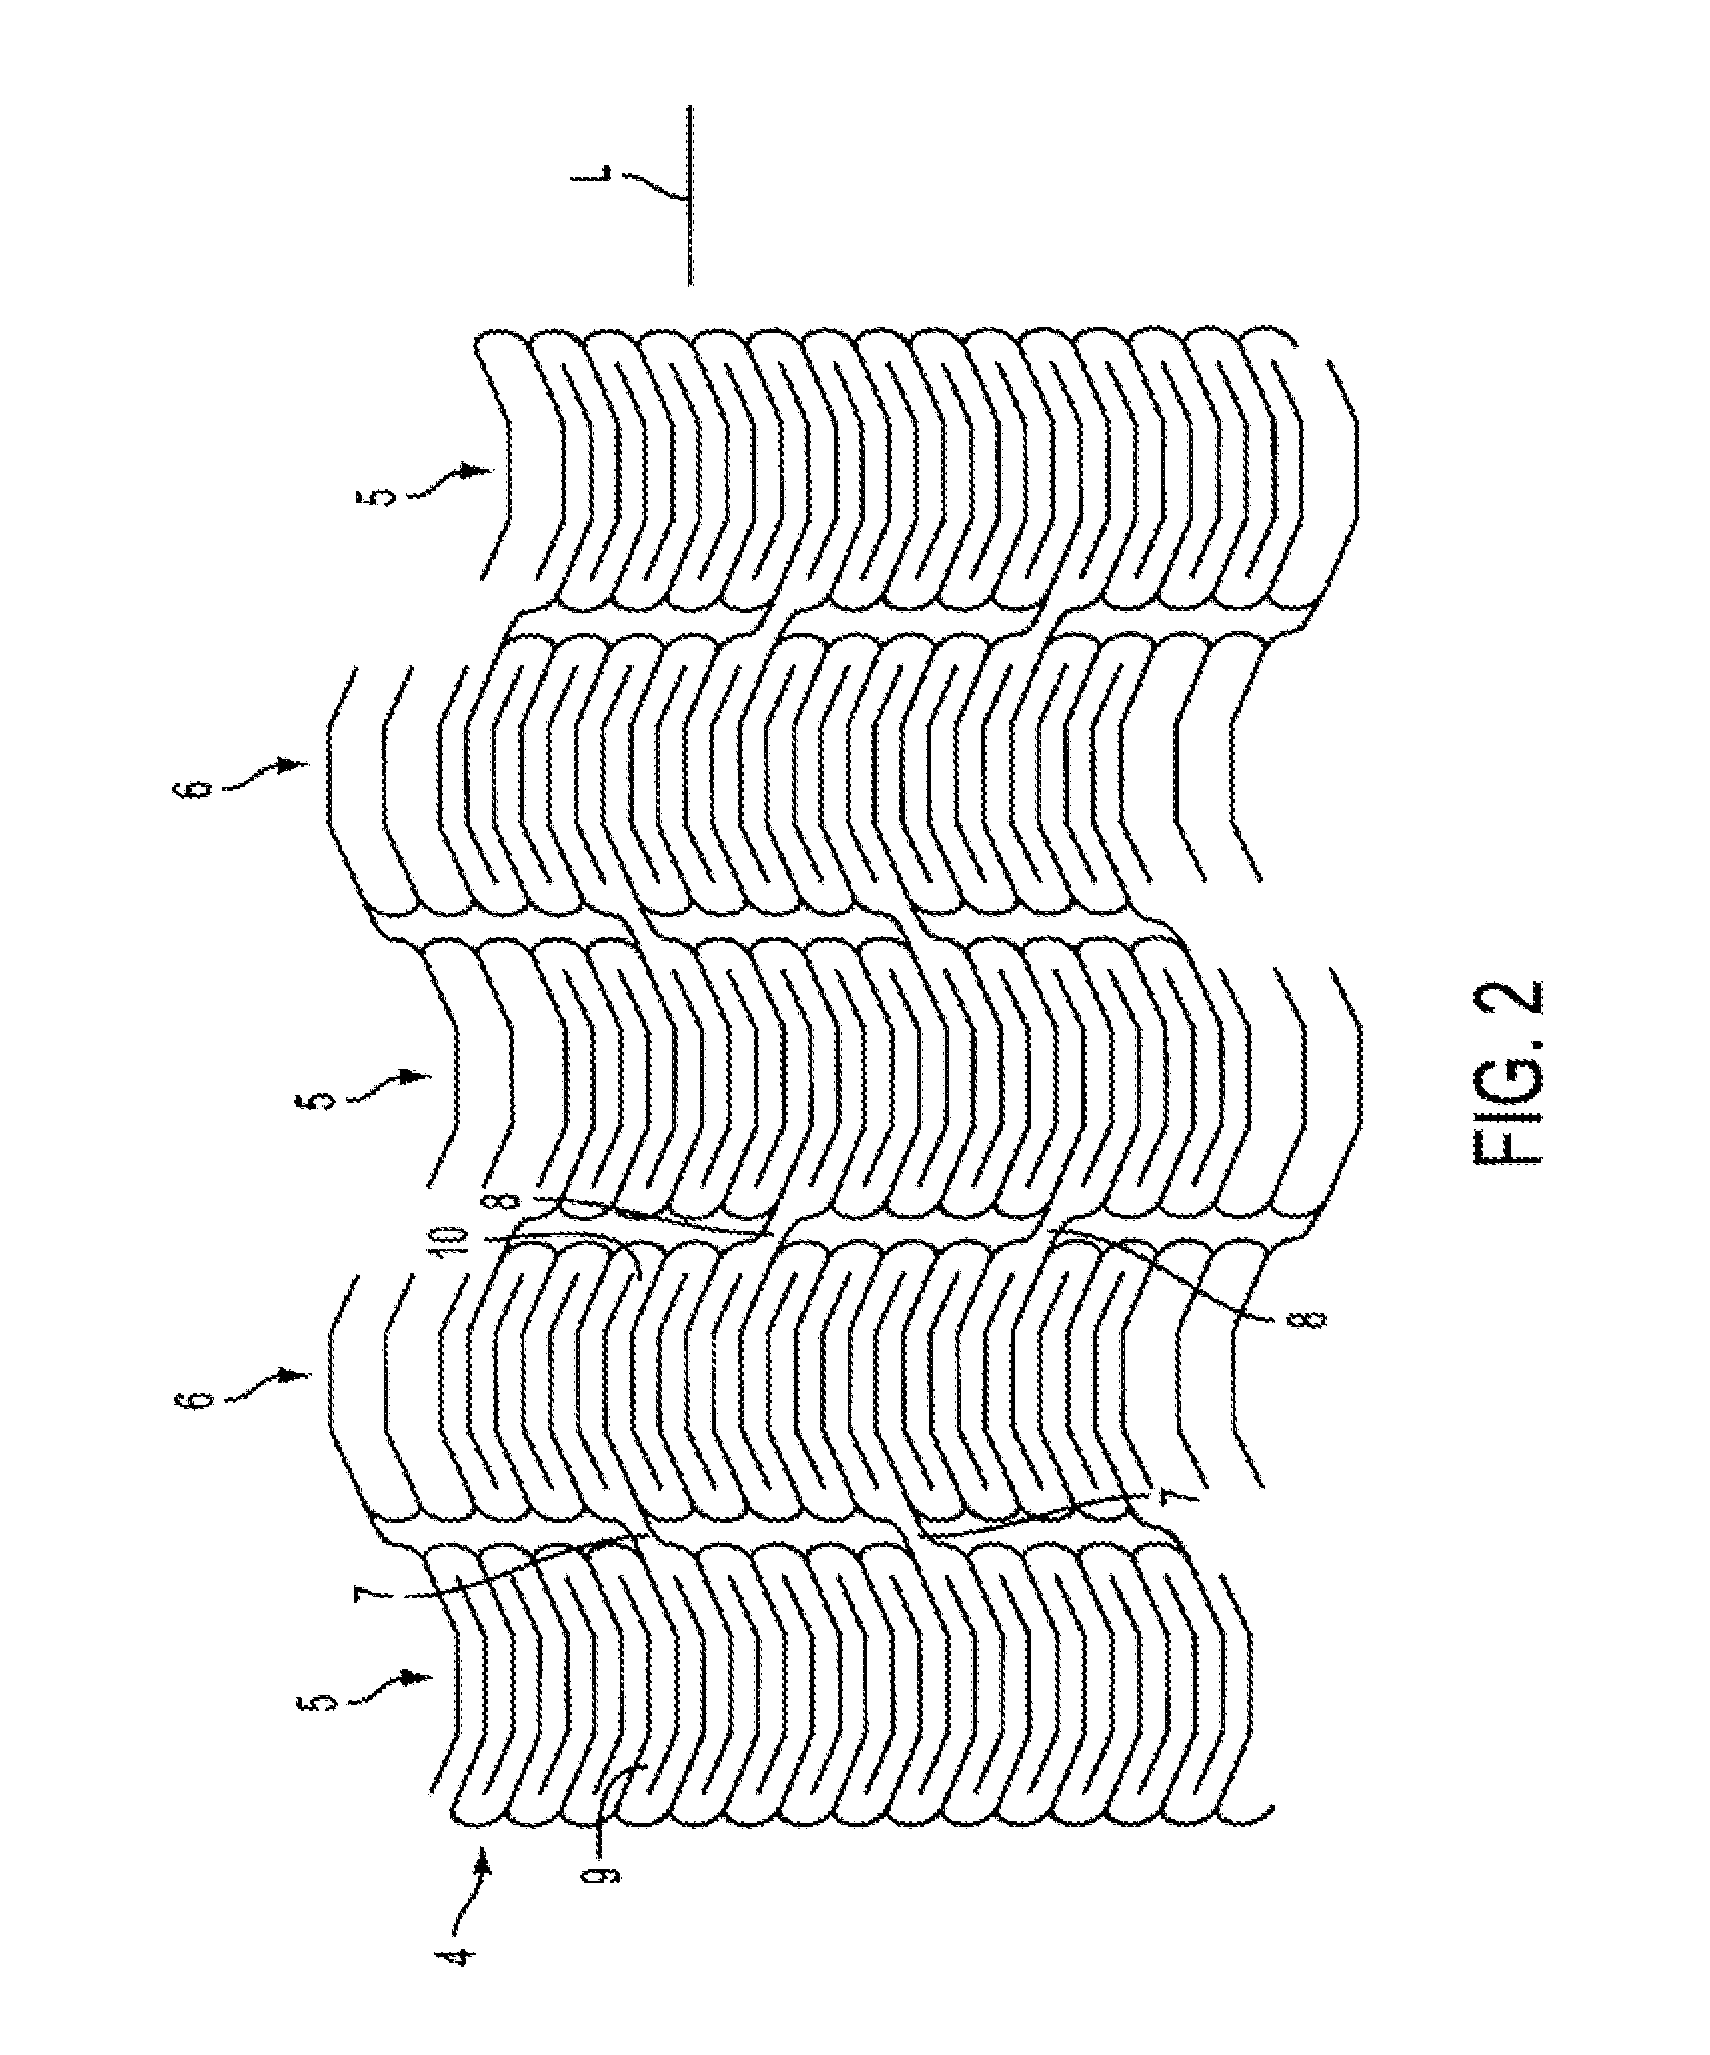 Methods and apparatus for stenting comprising enhanced embolic protection coupled with improved protections against restenosis and thrombus formation